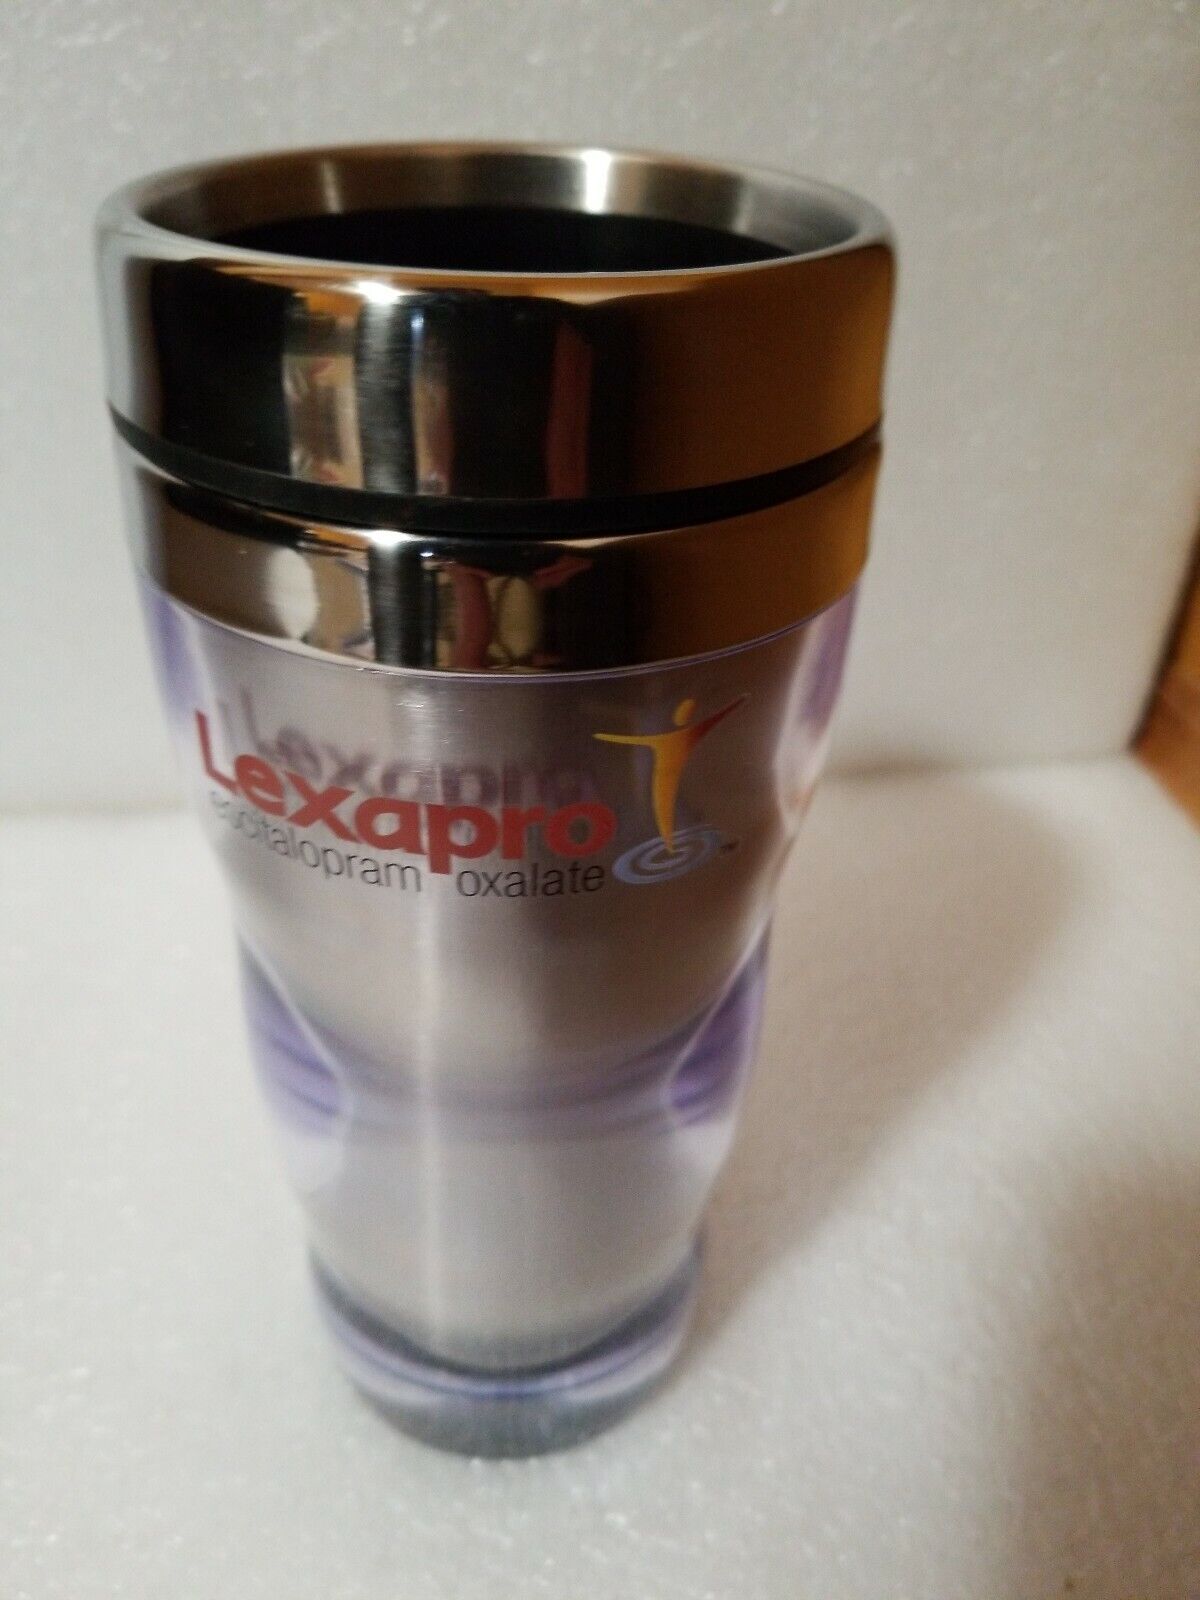 LEXAPRO TABLETS ( DRUG MEDICINE ADVERTISING ), ACRYLIC TUMBLER DRINK/ COFFEE CUP